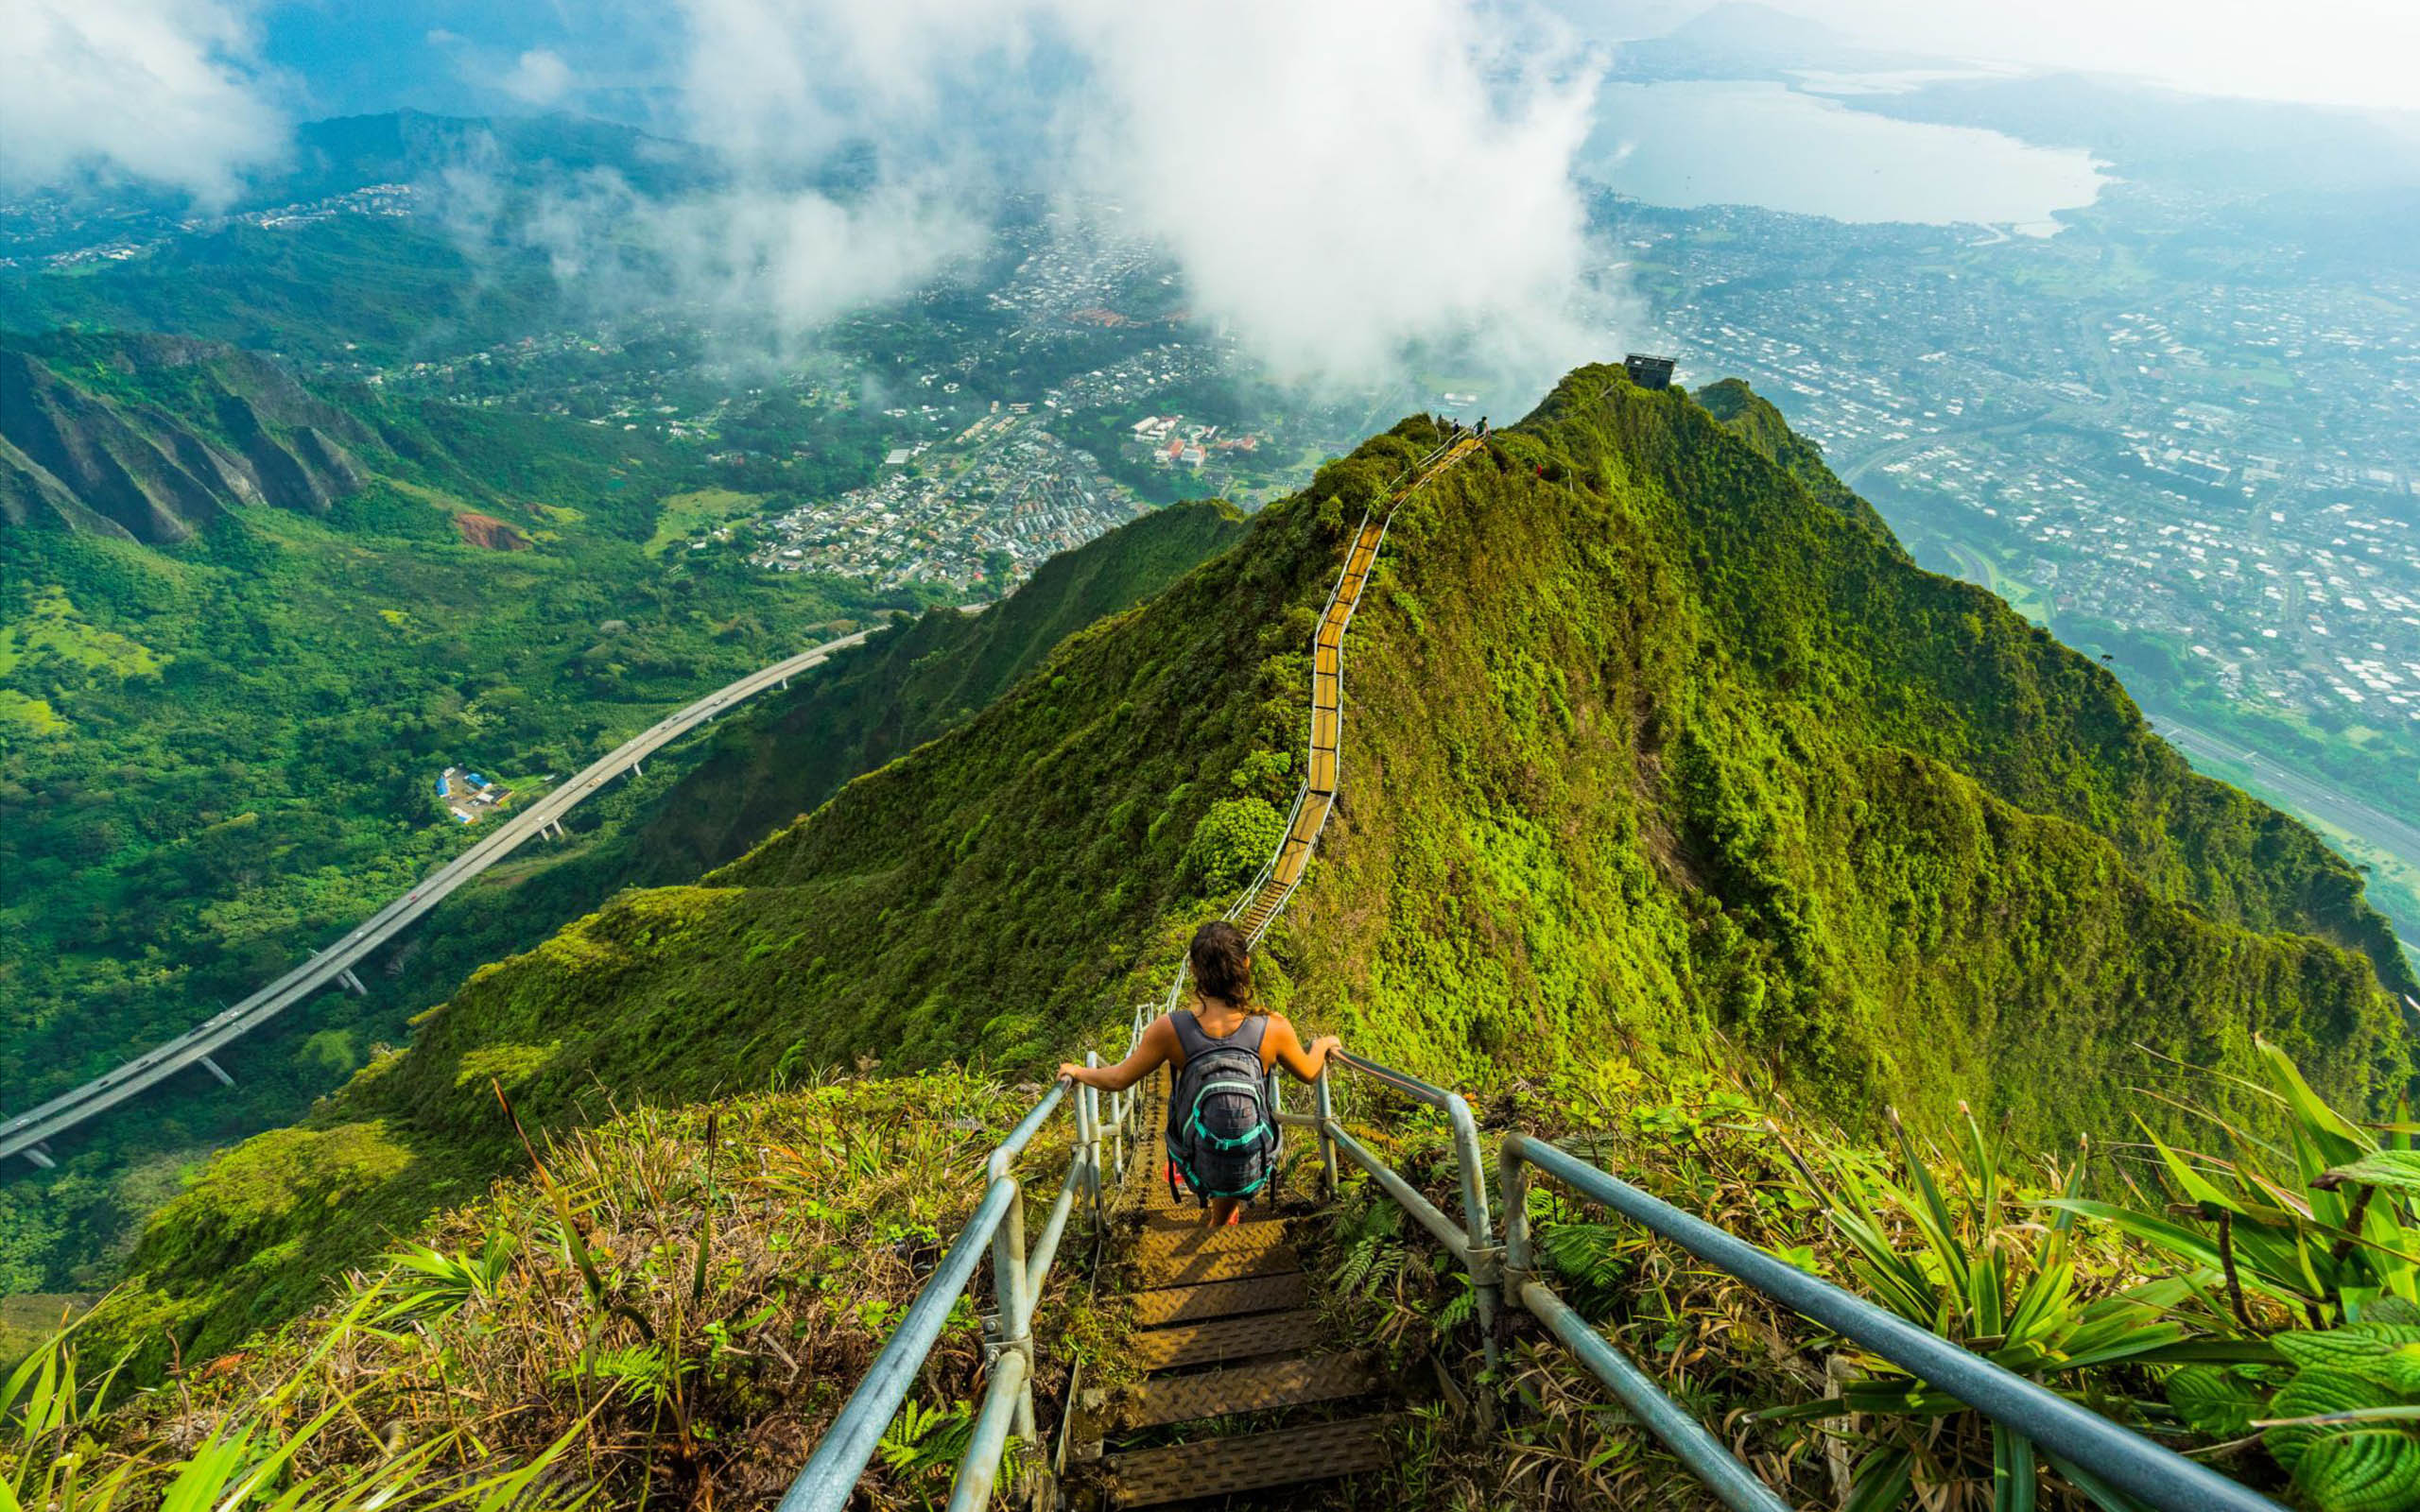 Haiku Stairs Known As The Stairway To Heaven Or Haʻikū Ladder On The Island Of Oʻahu Hawaii, Wallpaper13.com